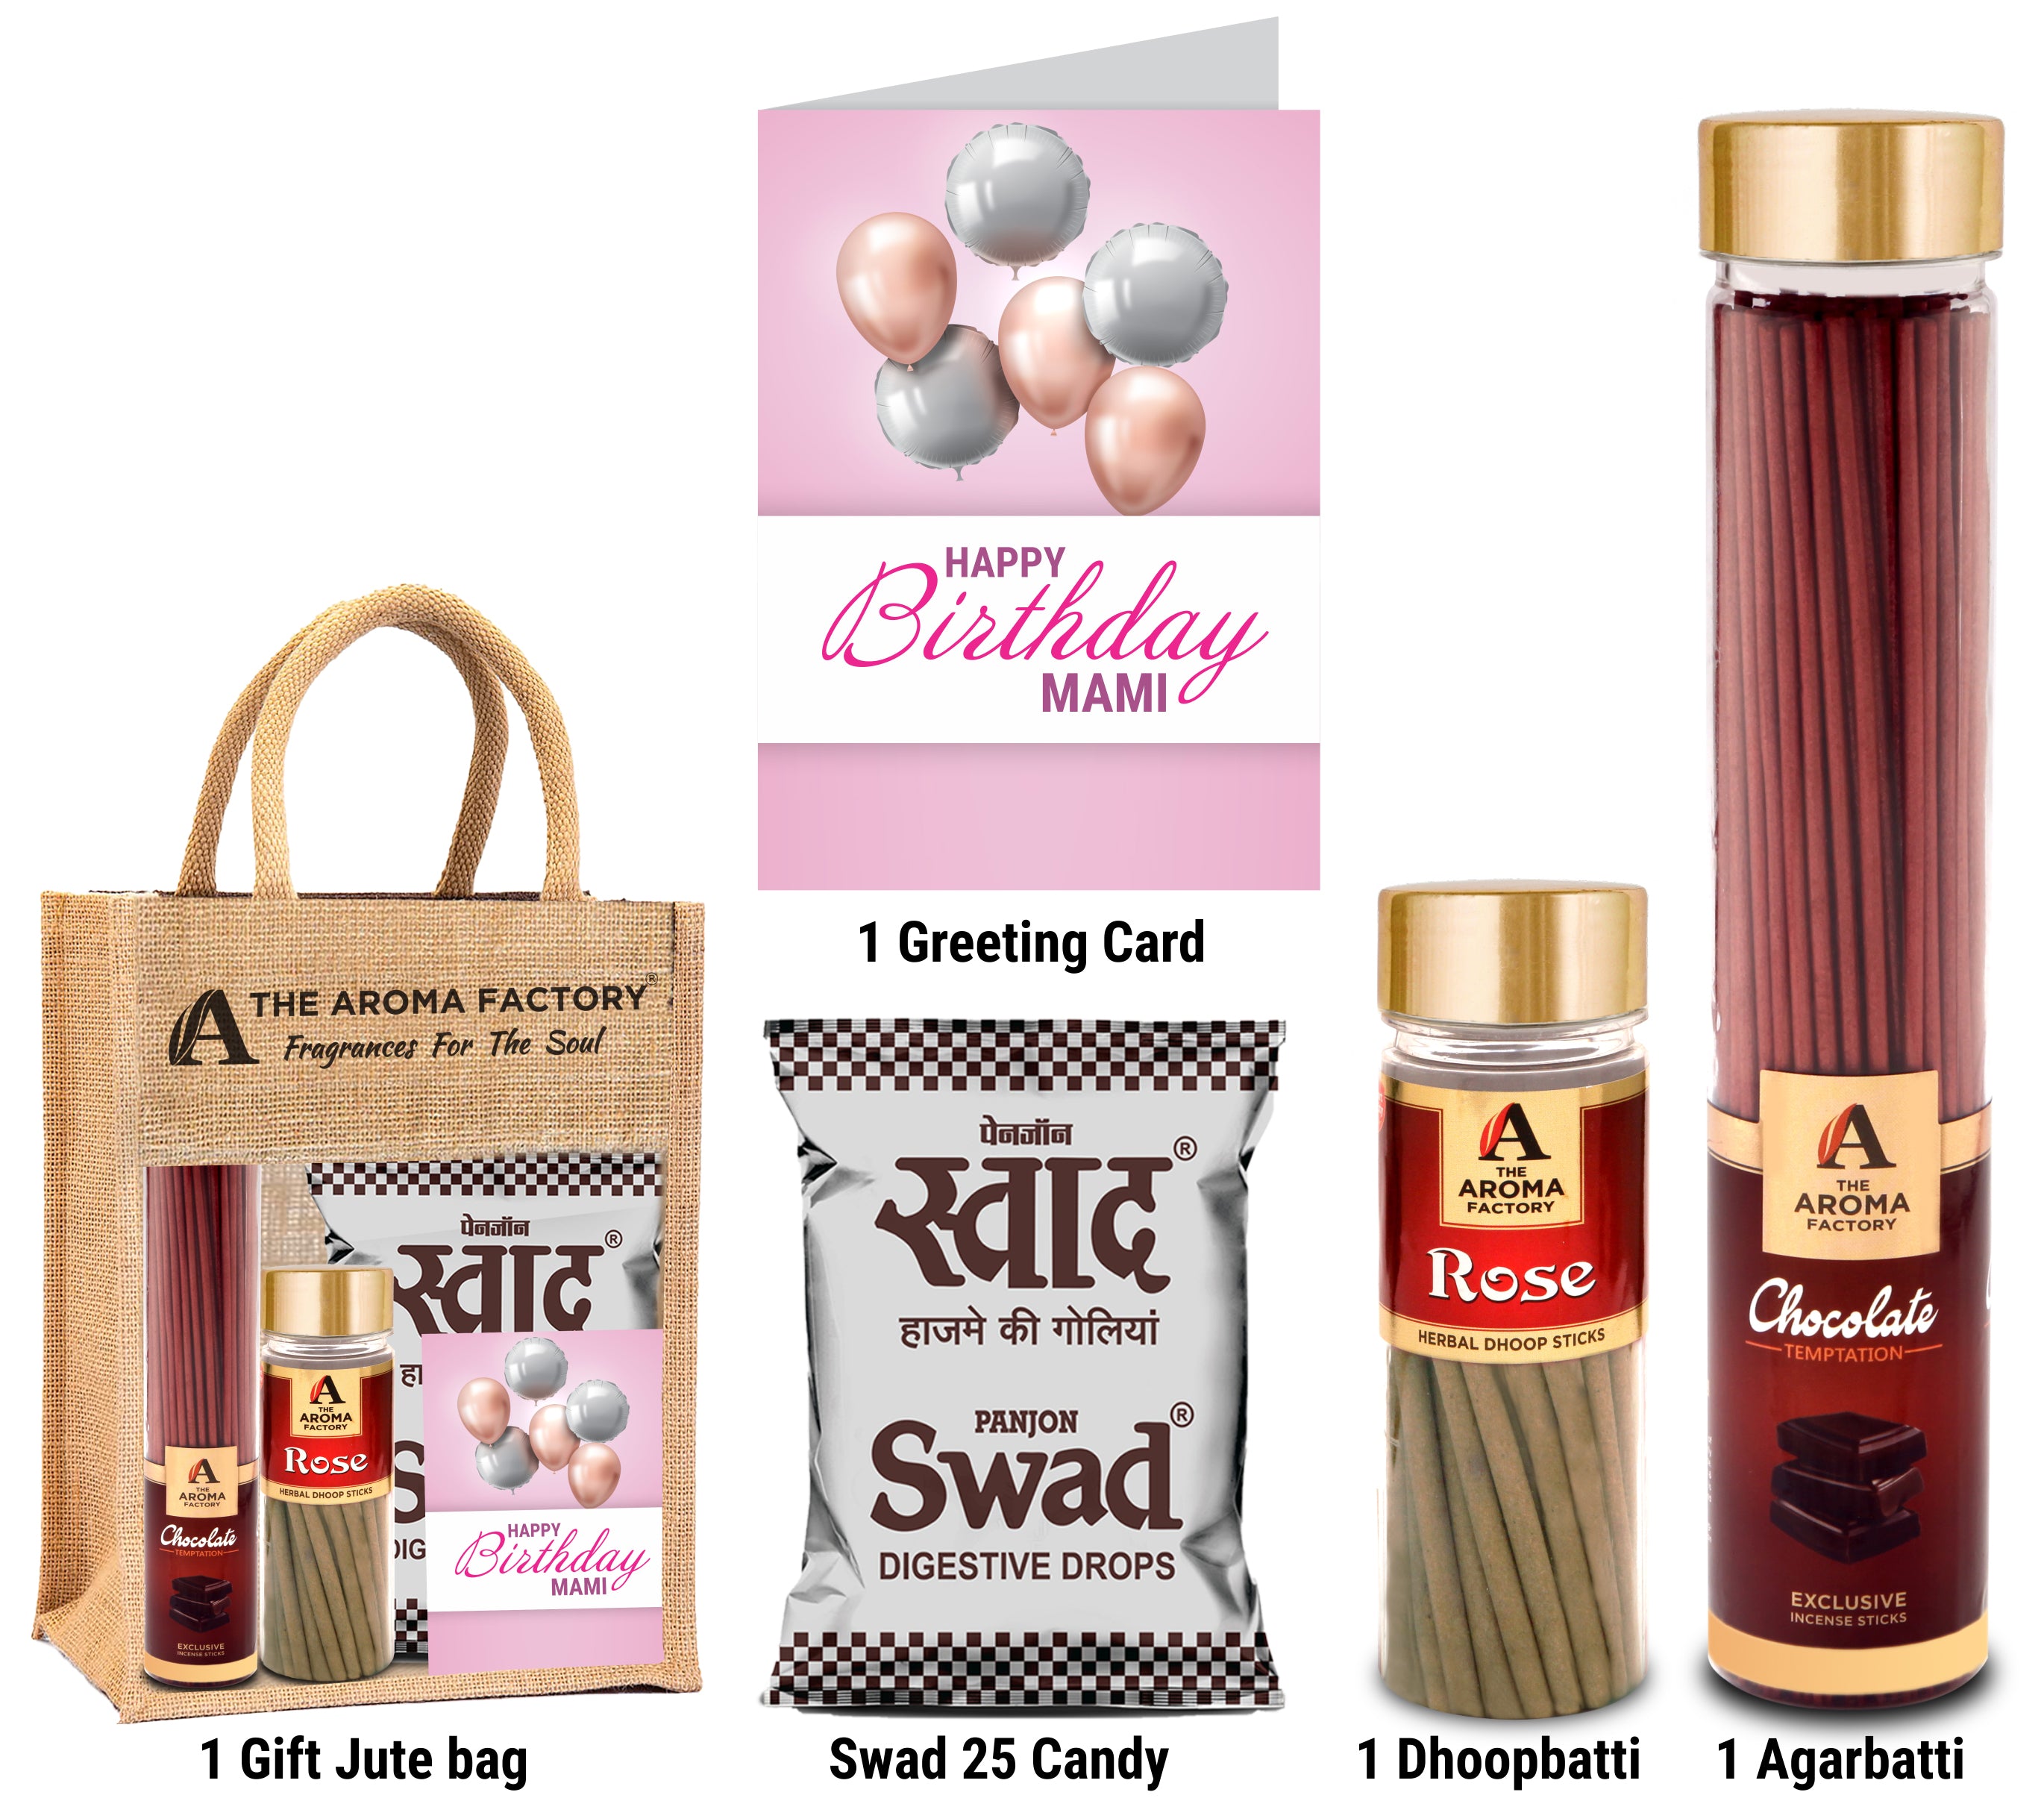 The Aroma Factory Happy Birthday Mami Gift with Card (25 Swad Candy, Chocolate Agarbatti Bottle, Rose Dhoopbatti) in Jute Bag